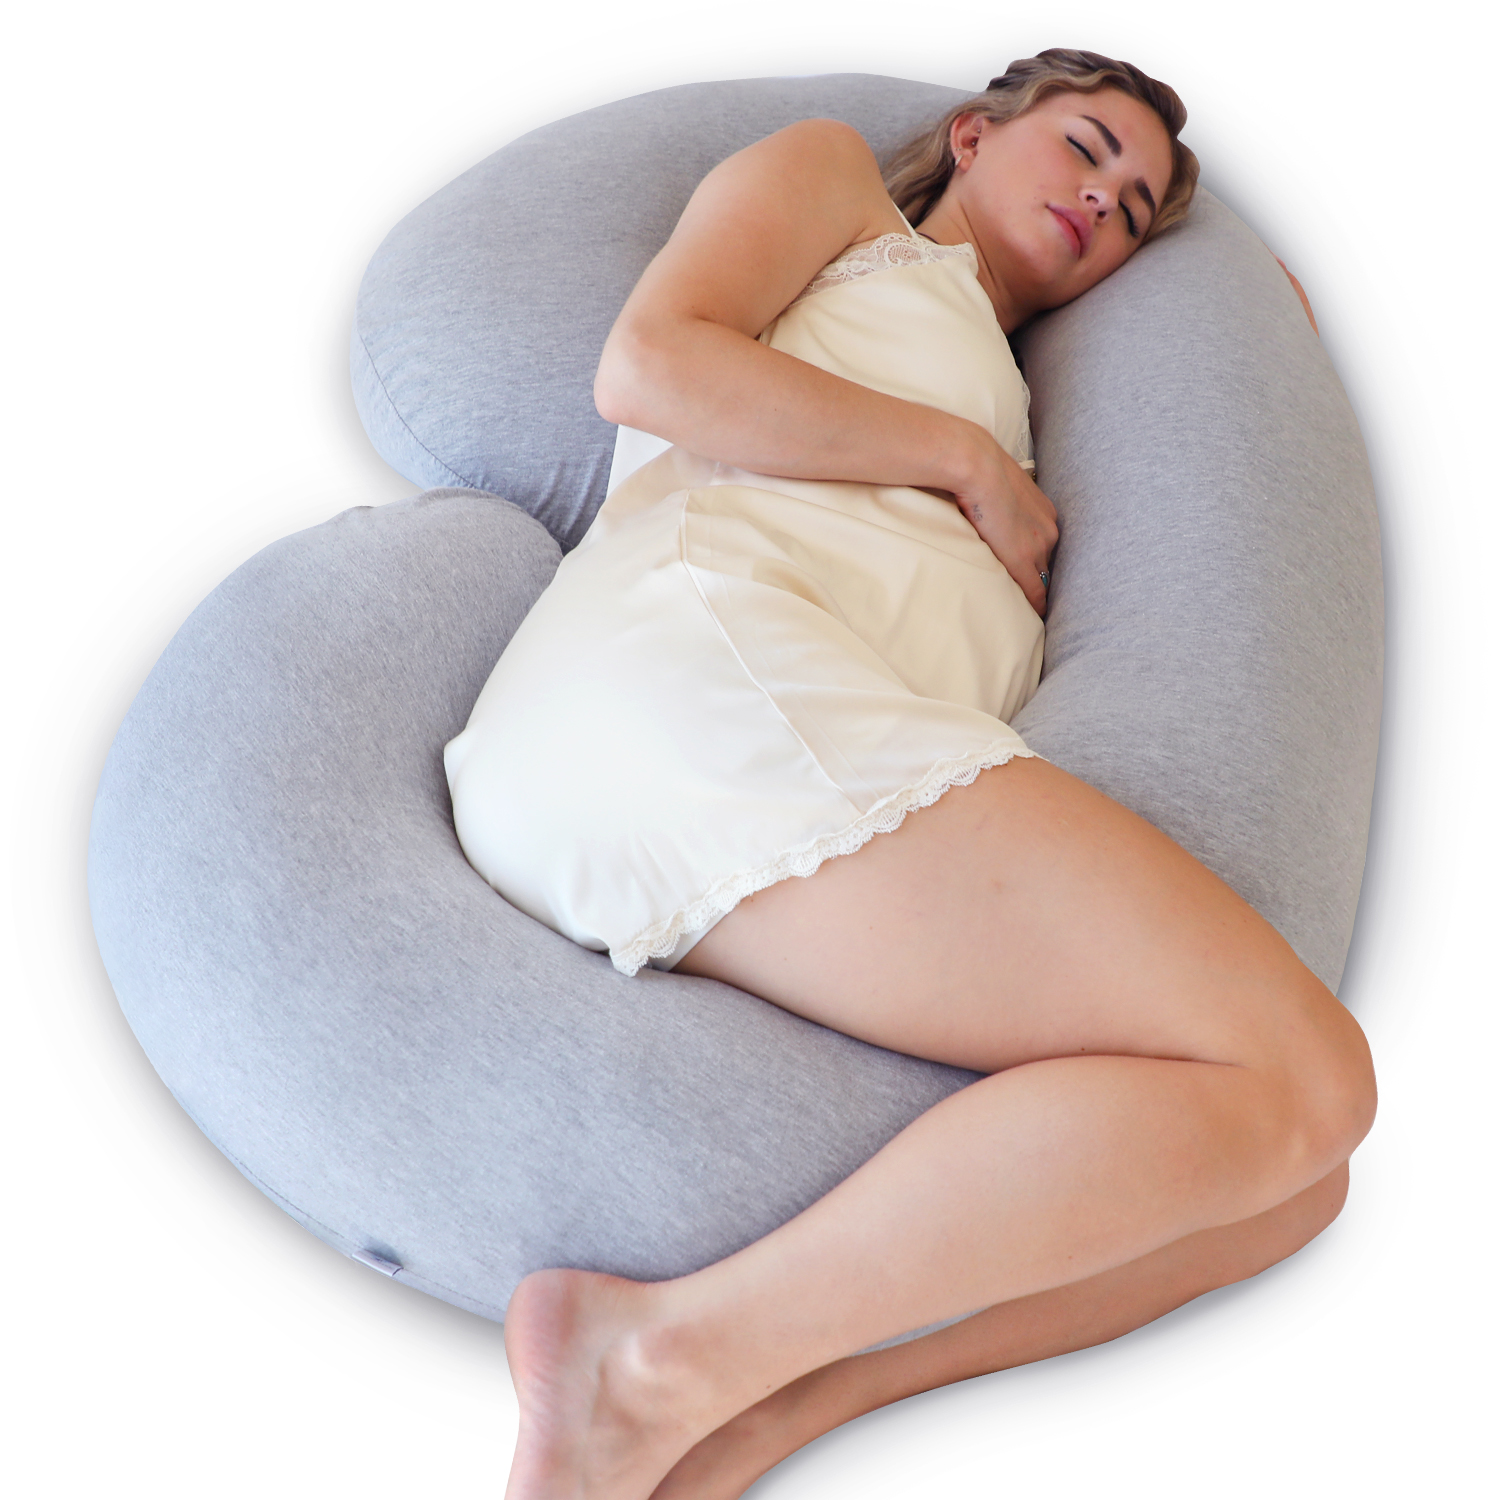 PharMeDoc Pregnancy Pillow - C-Shaped Body Pillow for Pregnant Women - Jersey Cover, Gray - image 1 of 6